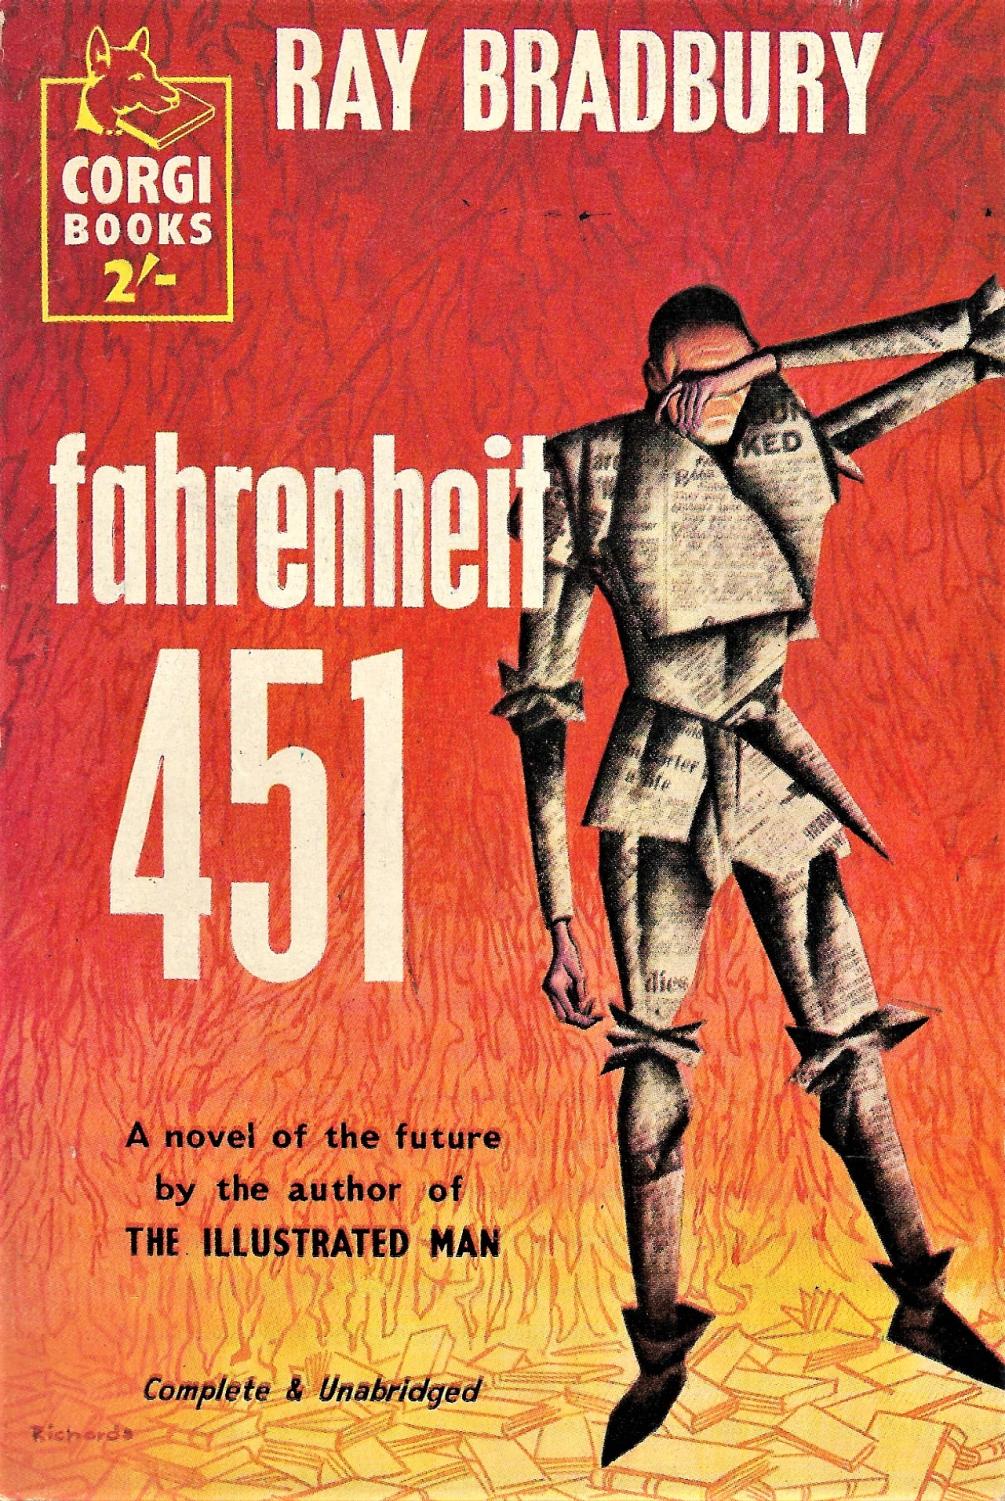 What is the deeper meaning of Fahrenheit 451, as a book written